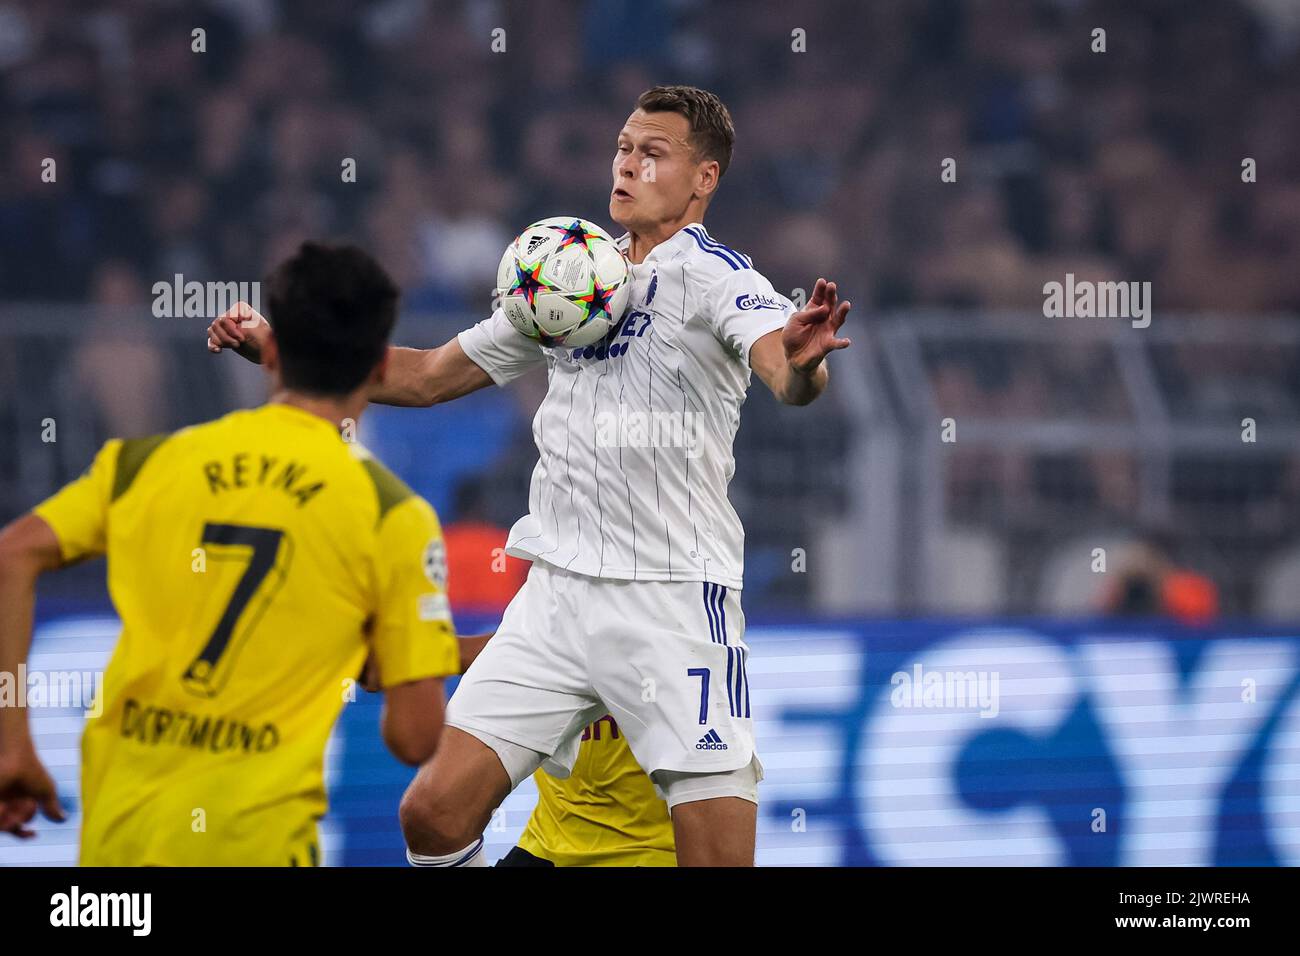 Dortmund, Germany. 06th Sep, 2022. DORTMUND, GERMANY - SEPTEMBER 6: Viktor Claesson of FC Copenhagen controls the ball during the UEFA Champions League Group G match between Borussia Dortmund and FC Copenhagen at the Signal Iduna Park on September 6, 2022 in Dortmund, Germany (Photo by Marcel ter Bals/Orange Pictures) Credit: Orange Pics BV/Alamy Live News Stock Photo